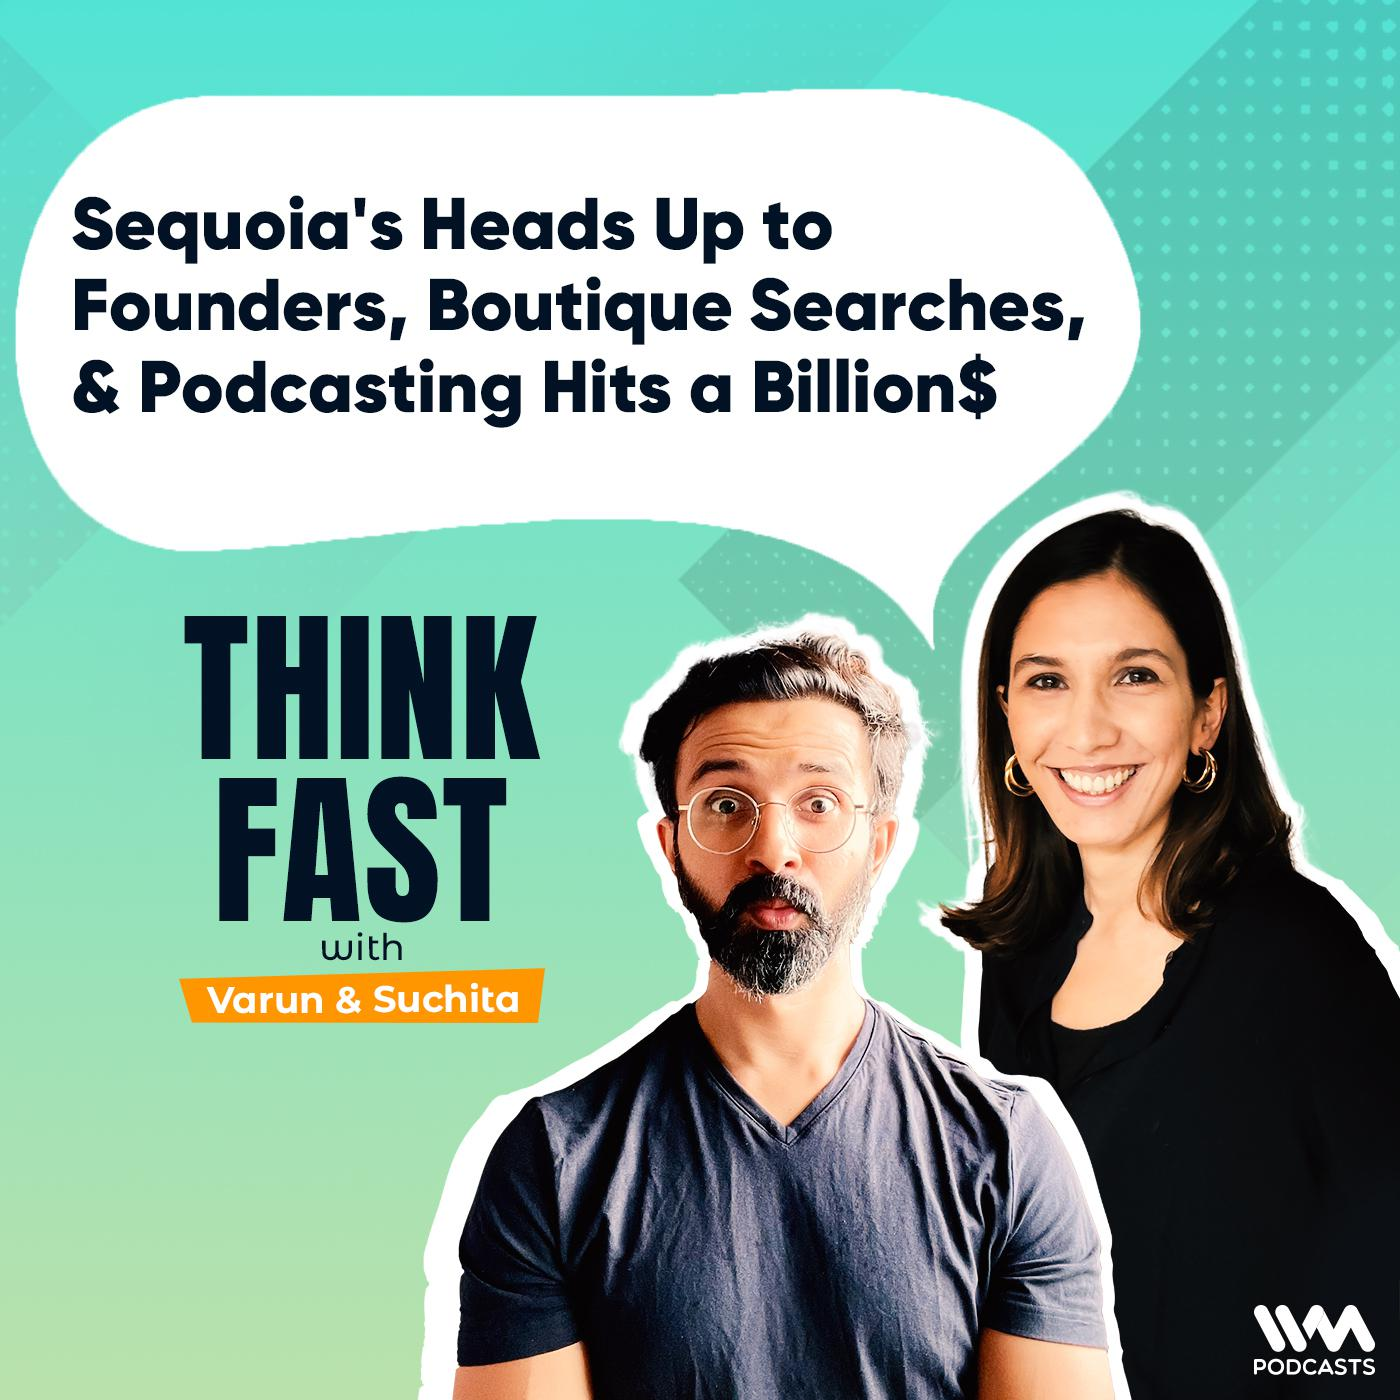 Sequoia's Heads Up to Founders, Boutique Searches, & Podcasting Hits a Billion$